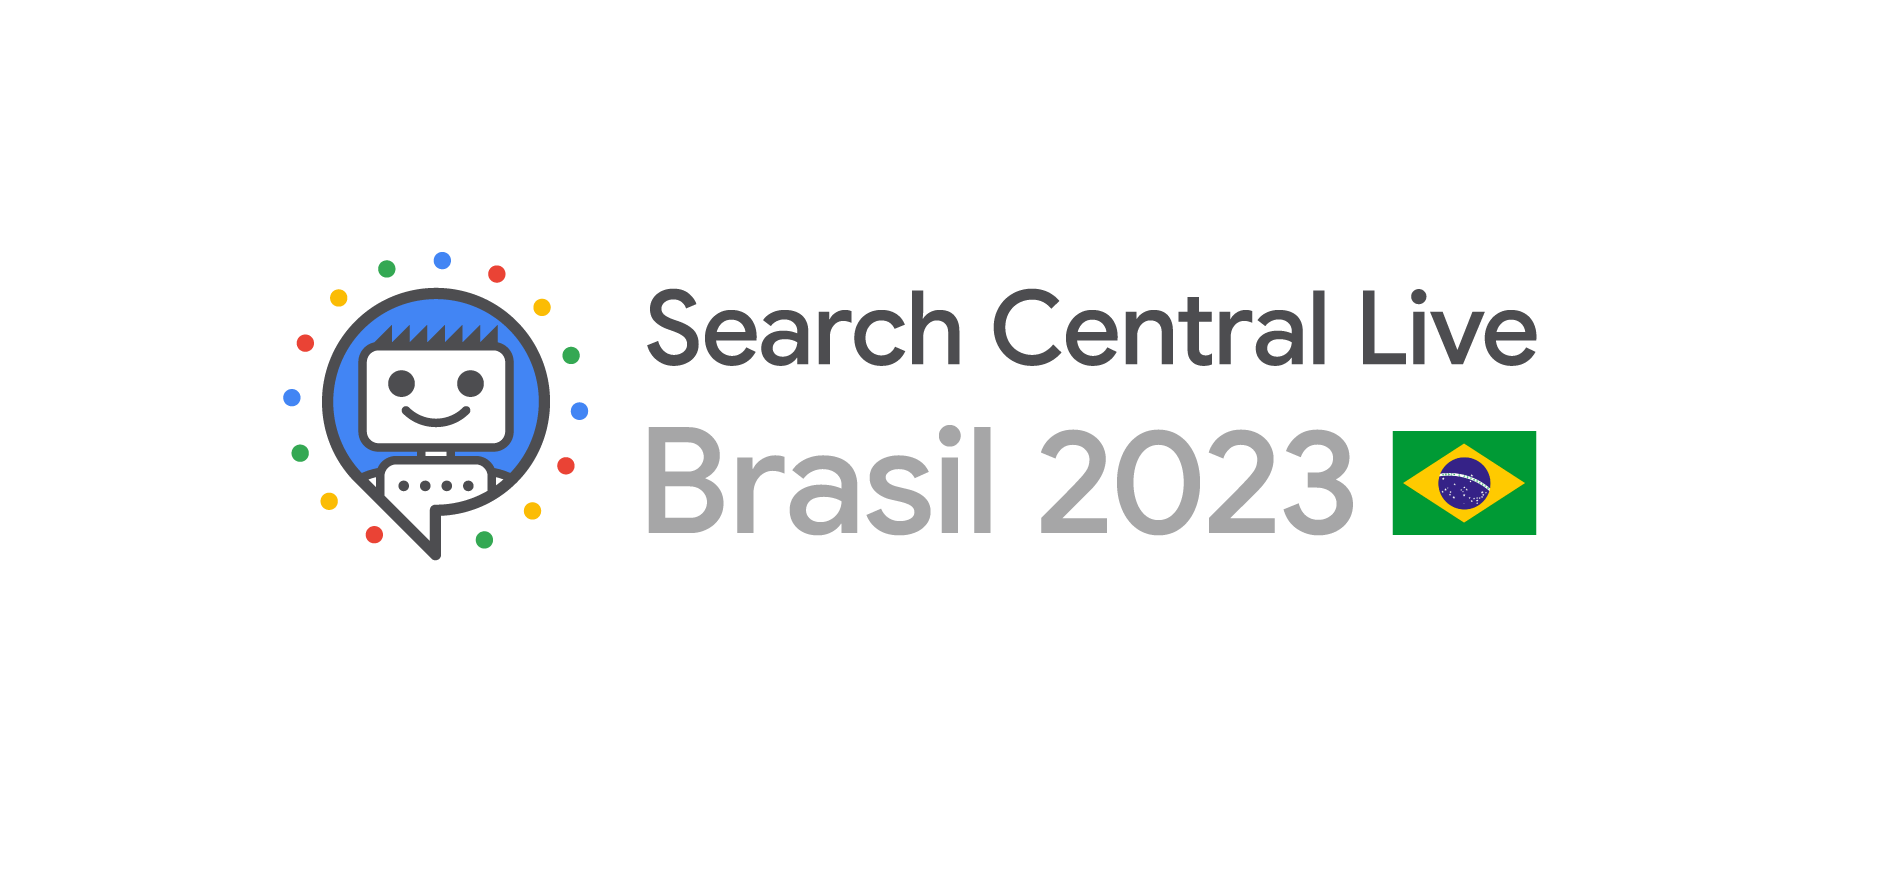 Announcing the Search Central Live Brazil roadshow  |  Google Search Central Blog  |  Google Developers